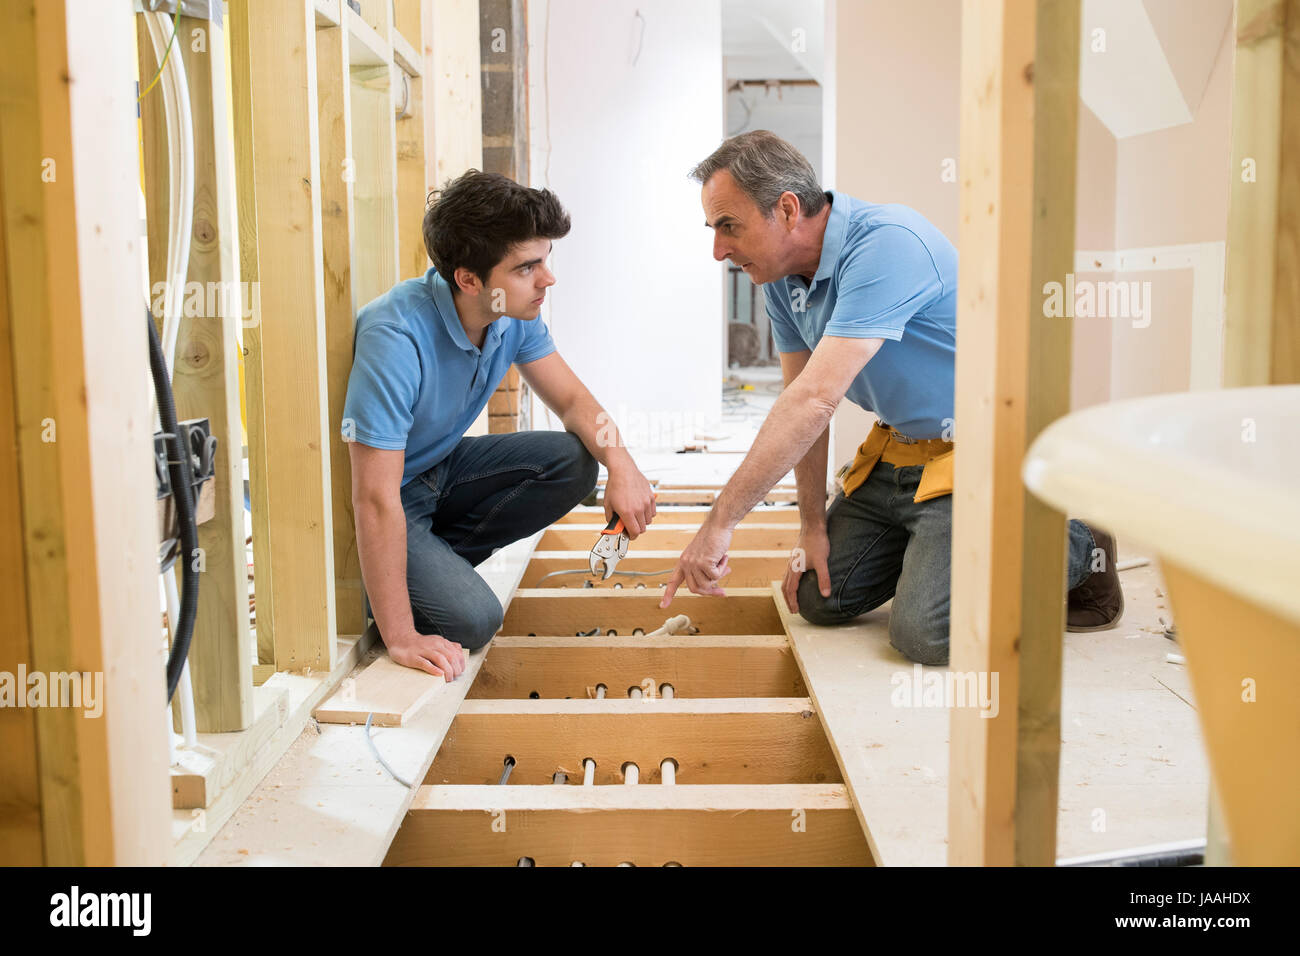 Plumber And Apprentice Fitting Central Heating Stock Photo